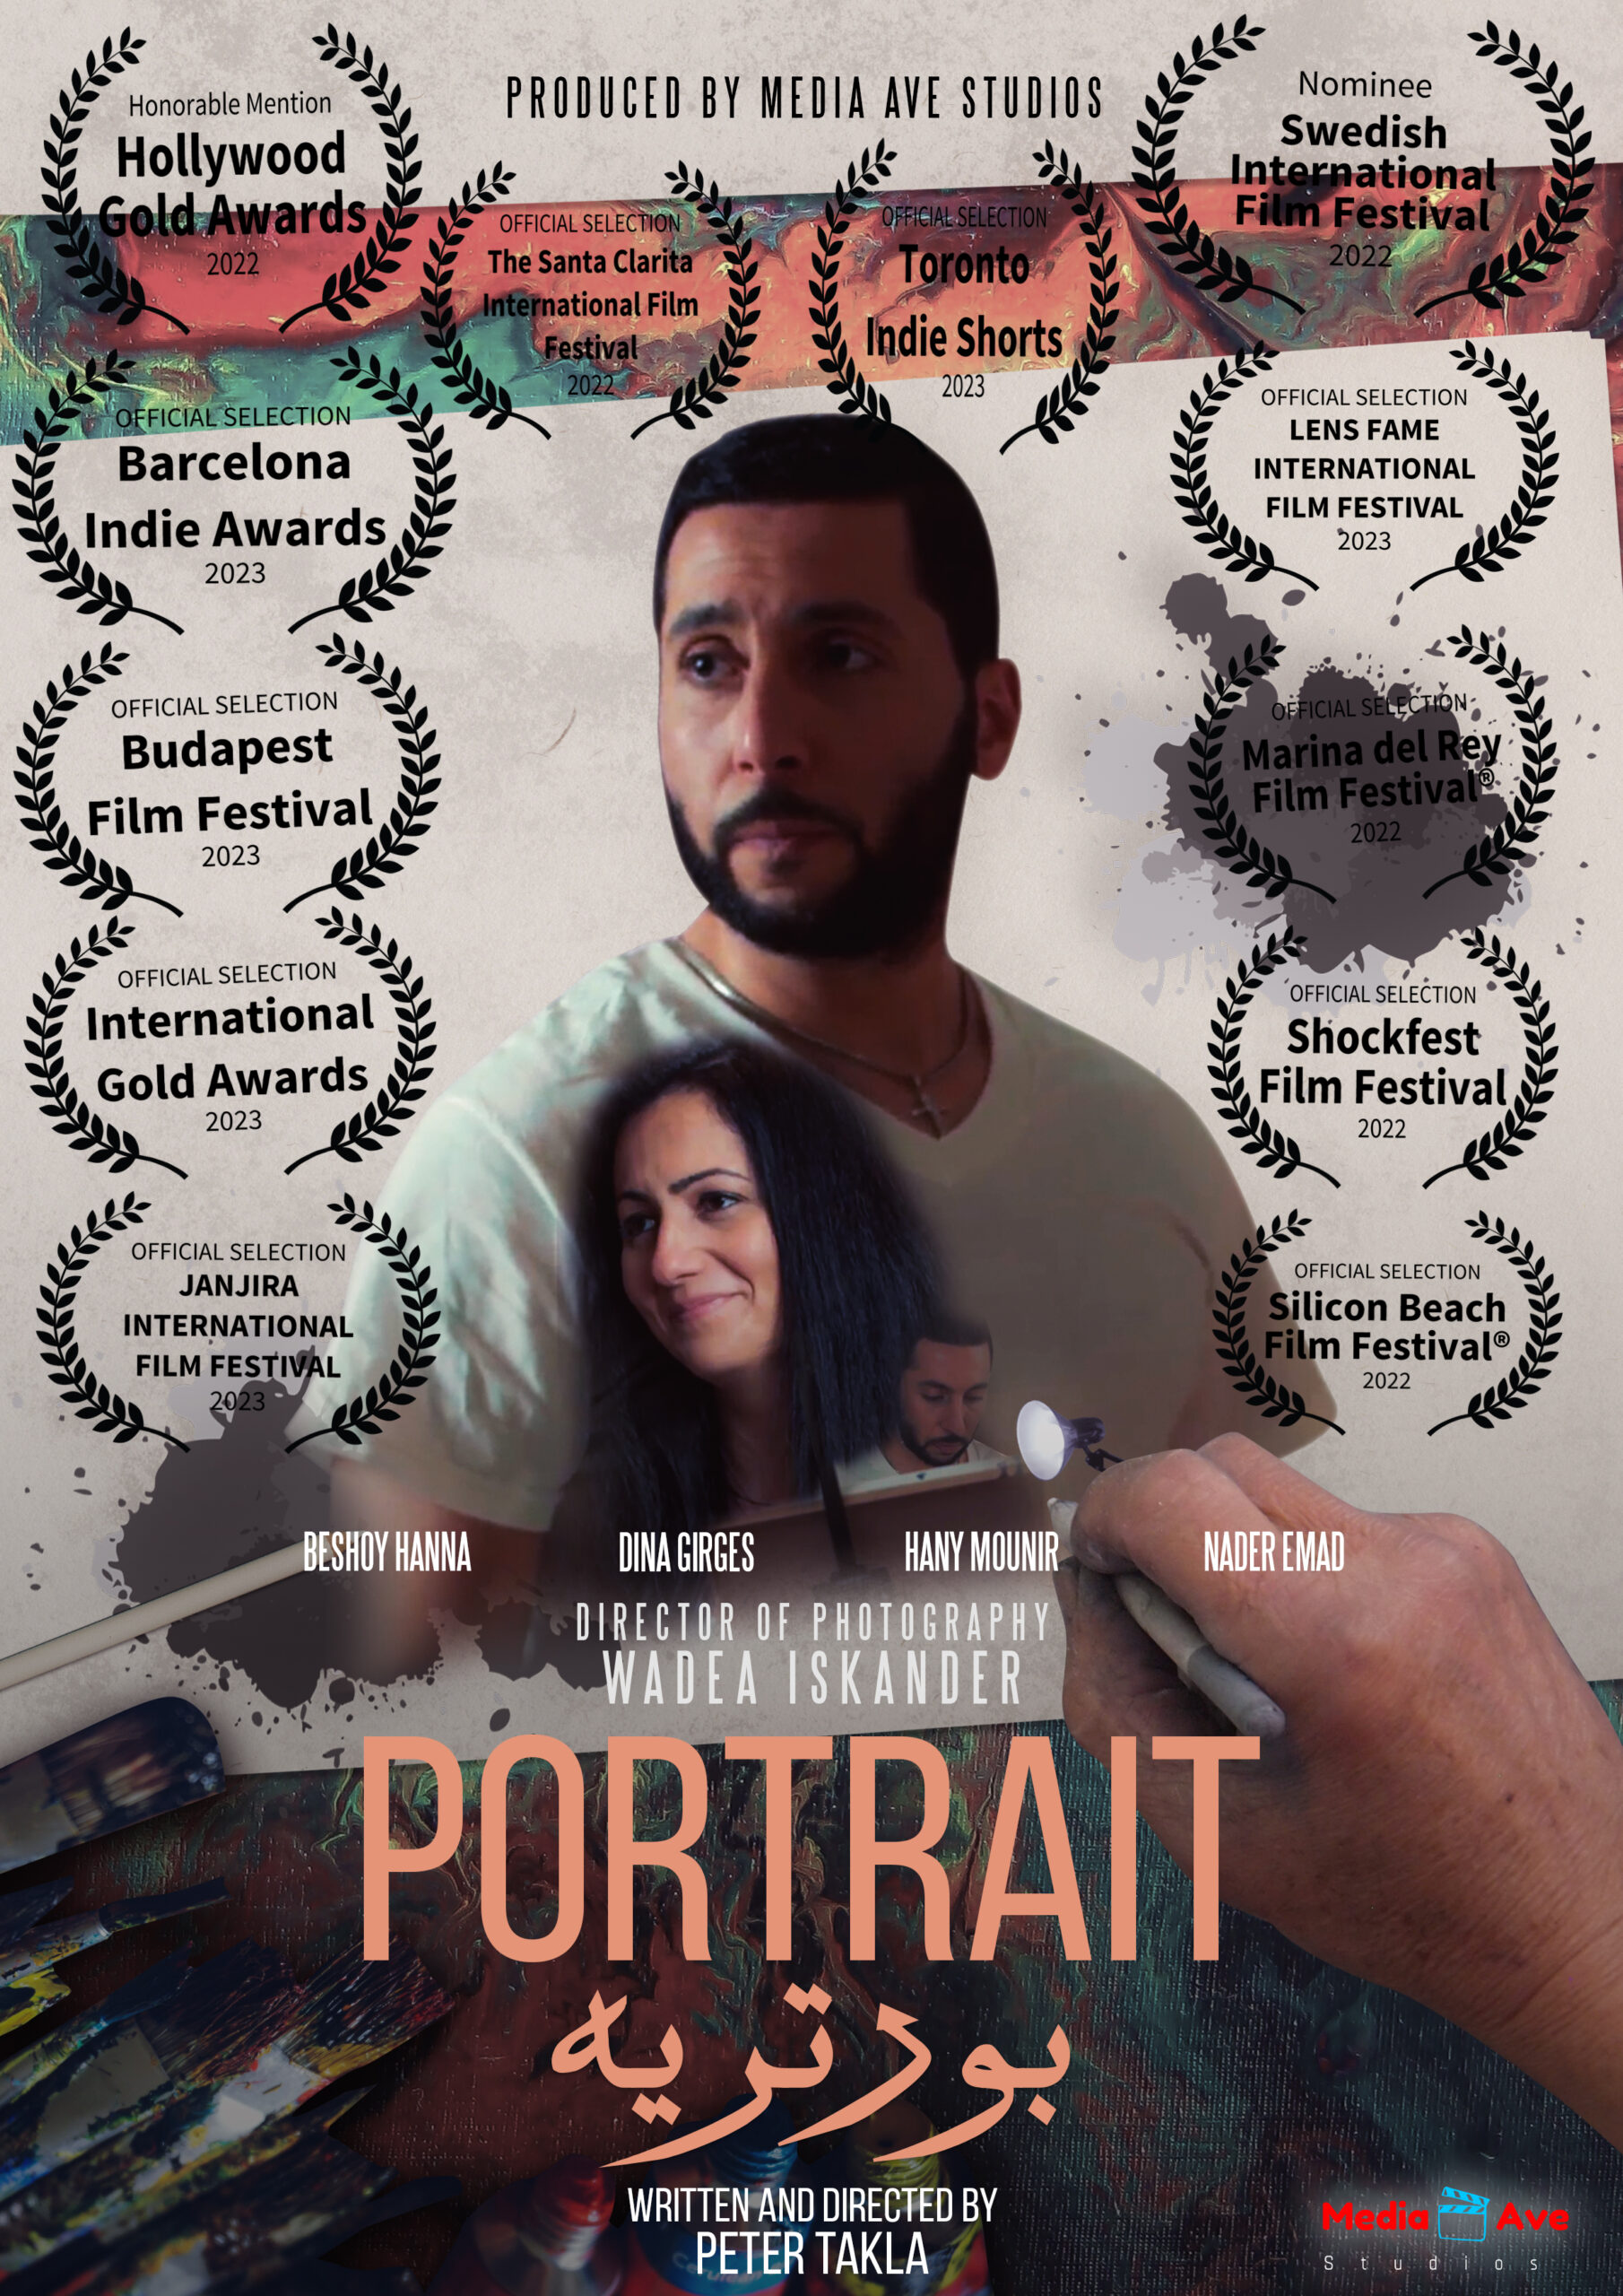 Portrait “ film is official selection of The Lebanese Independent Film Festival - LIFF ??? Sep 21-24 in Lebanon ??